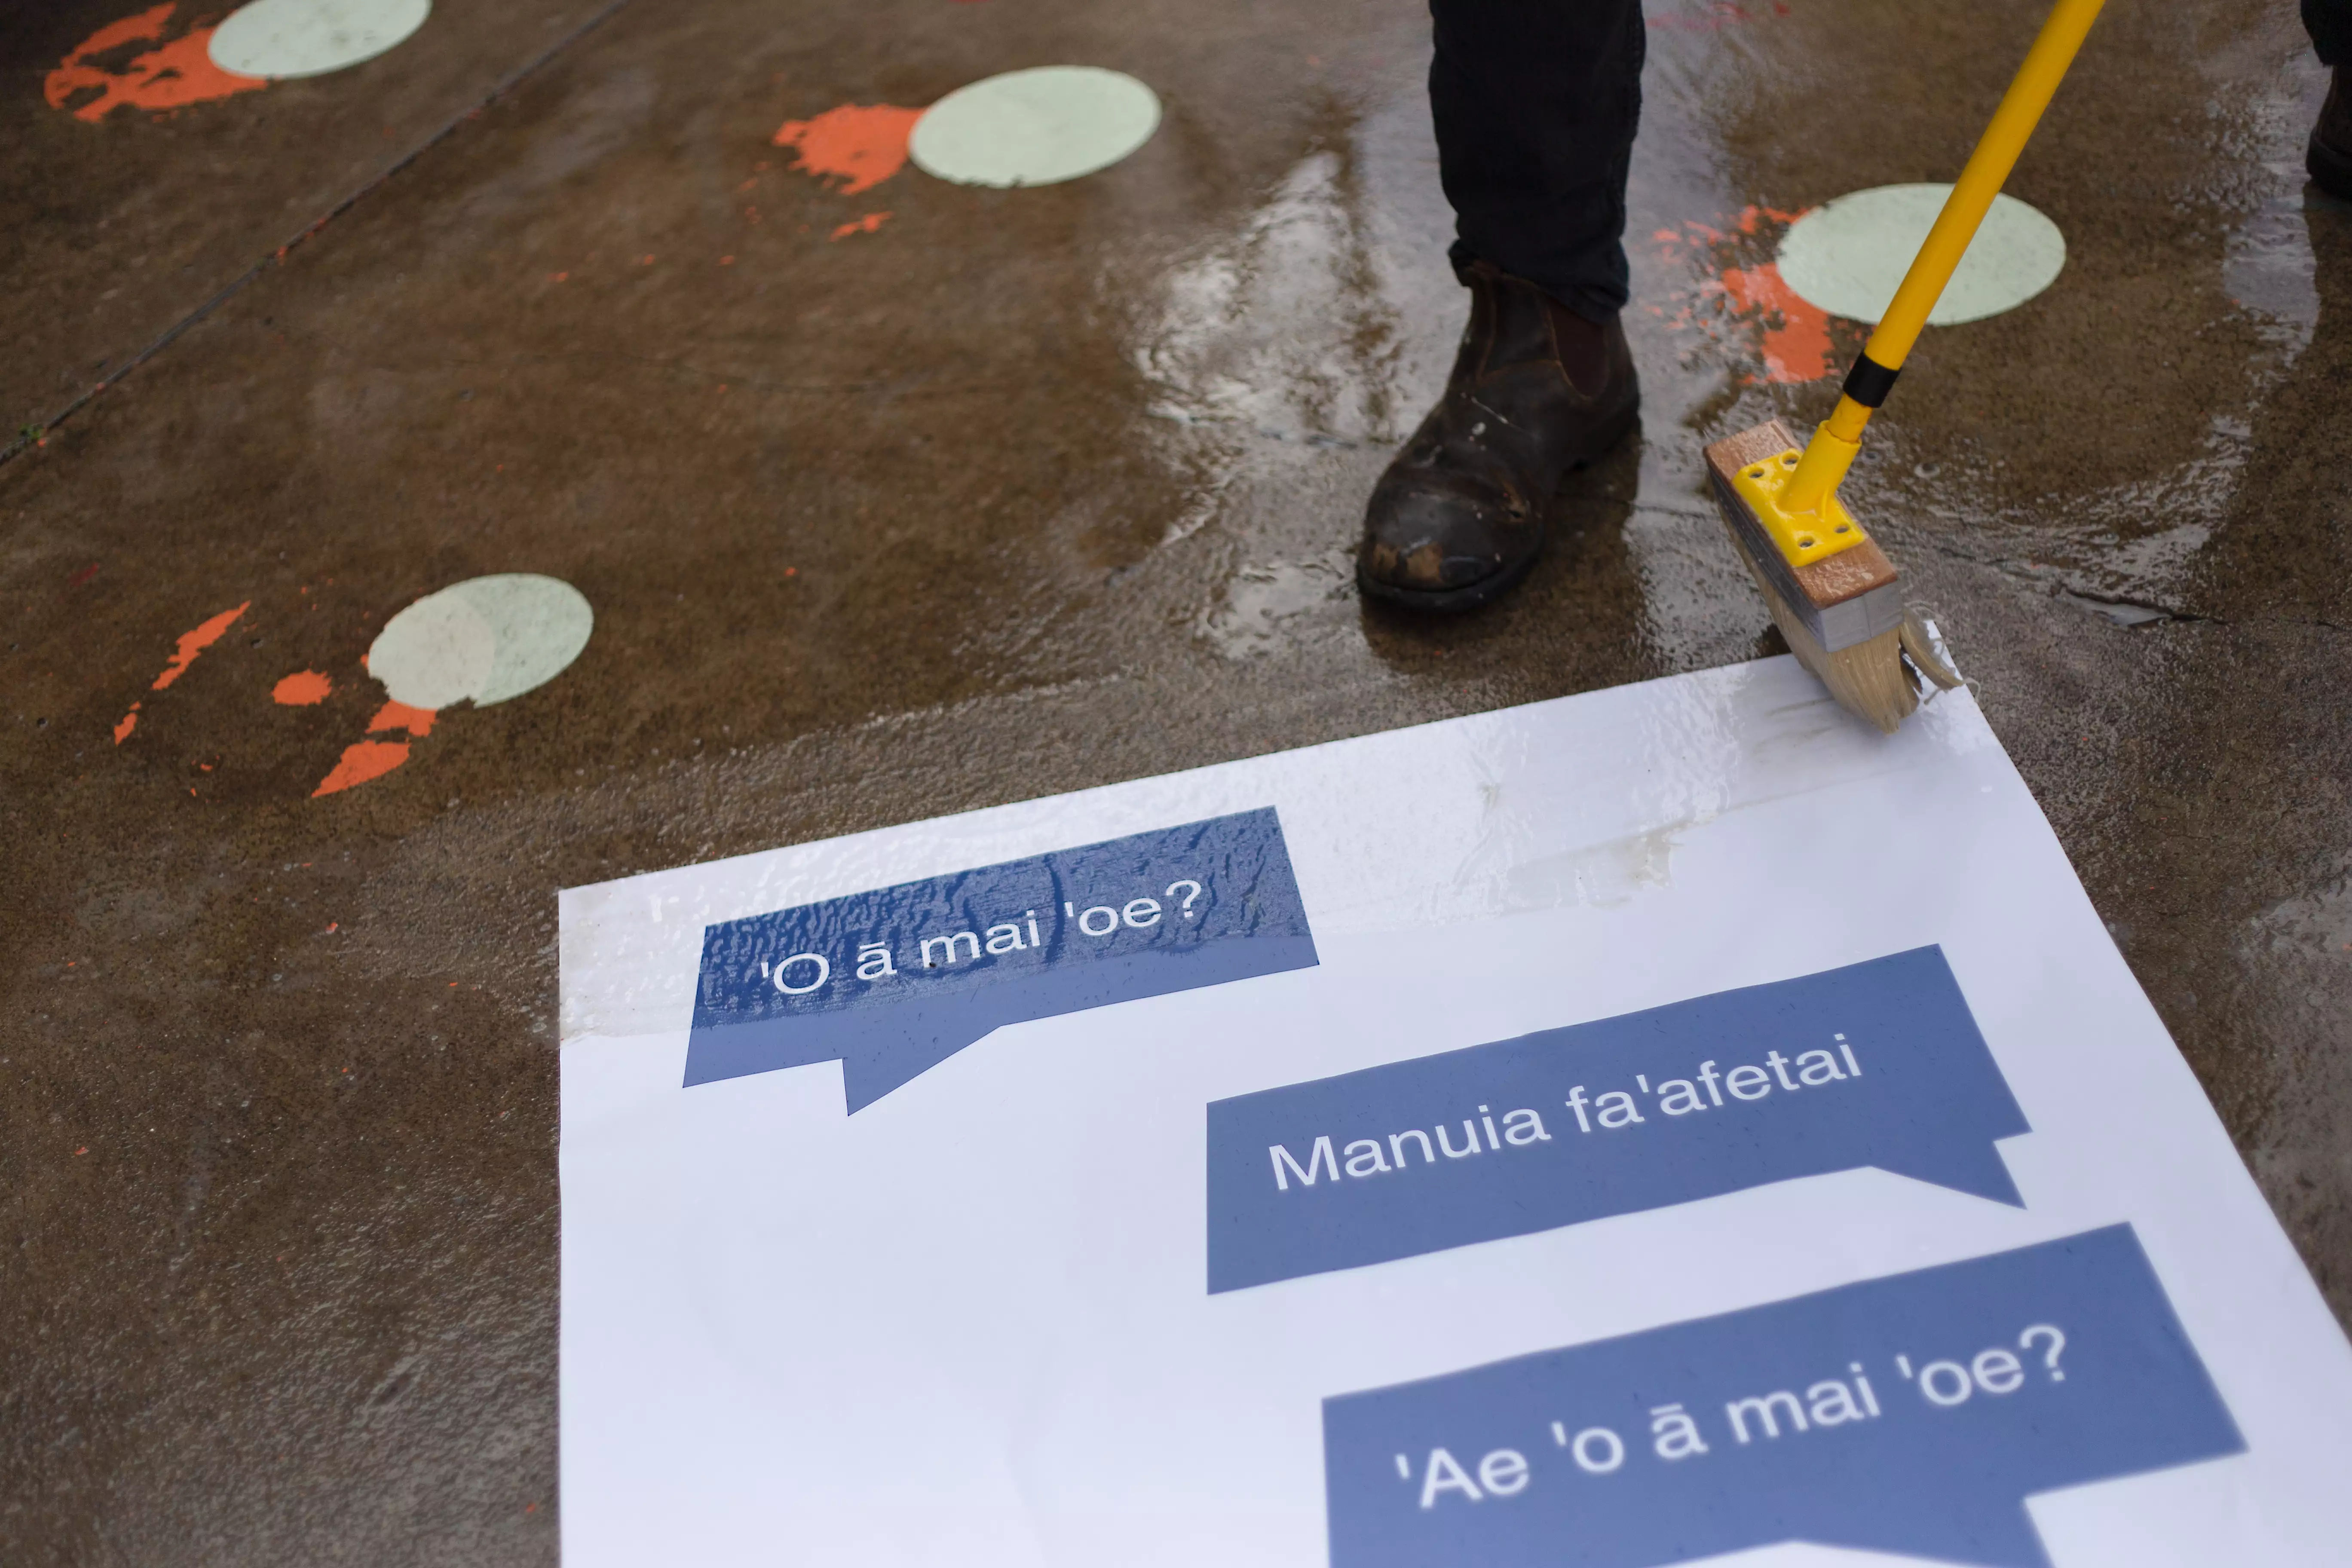 A poster being installed on the ground depicting basic Samoan phrases.